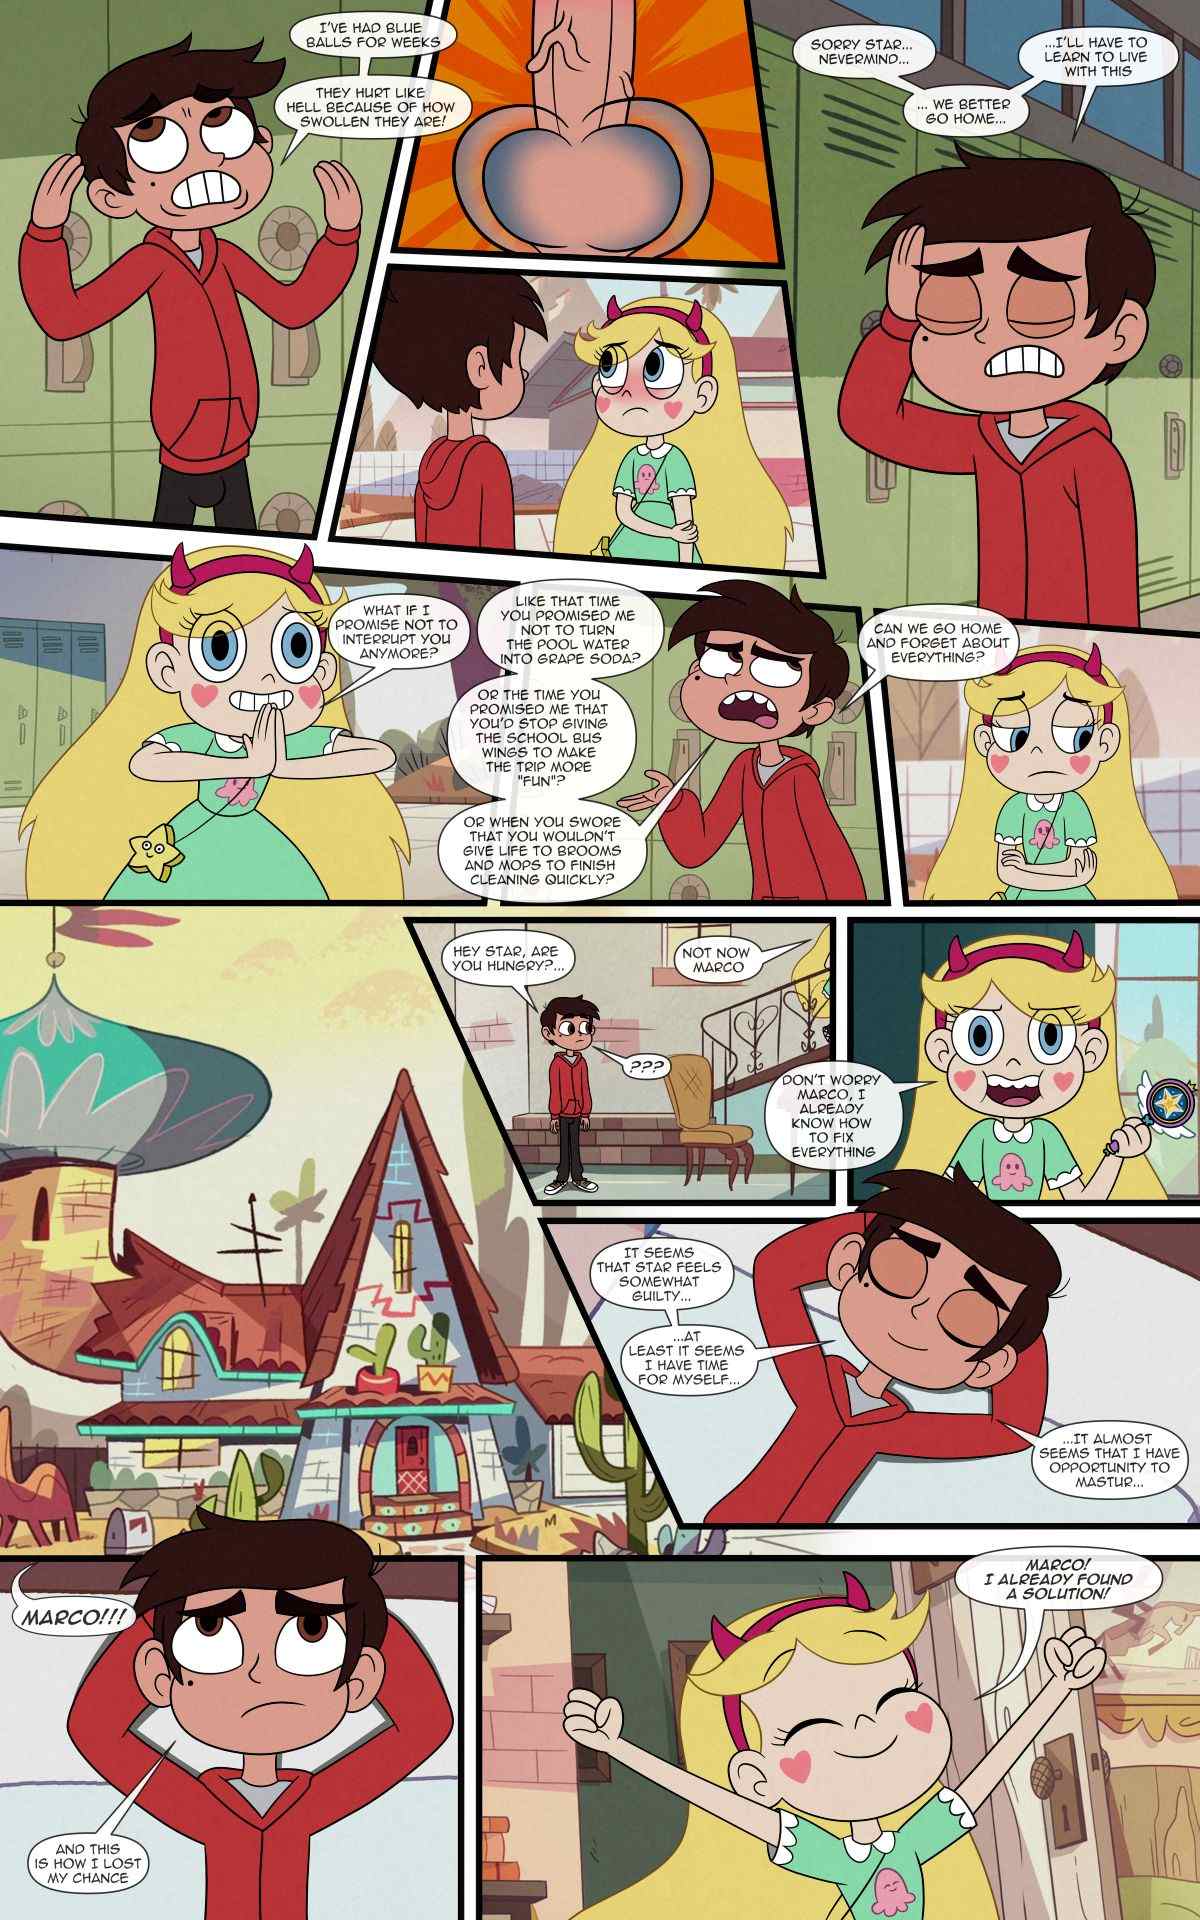 Time Together (Star vs. The Forces of Evil) Broshogun - Comics Army